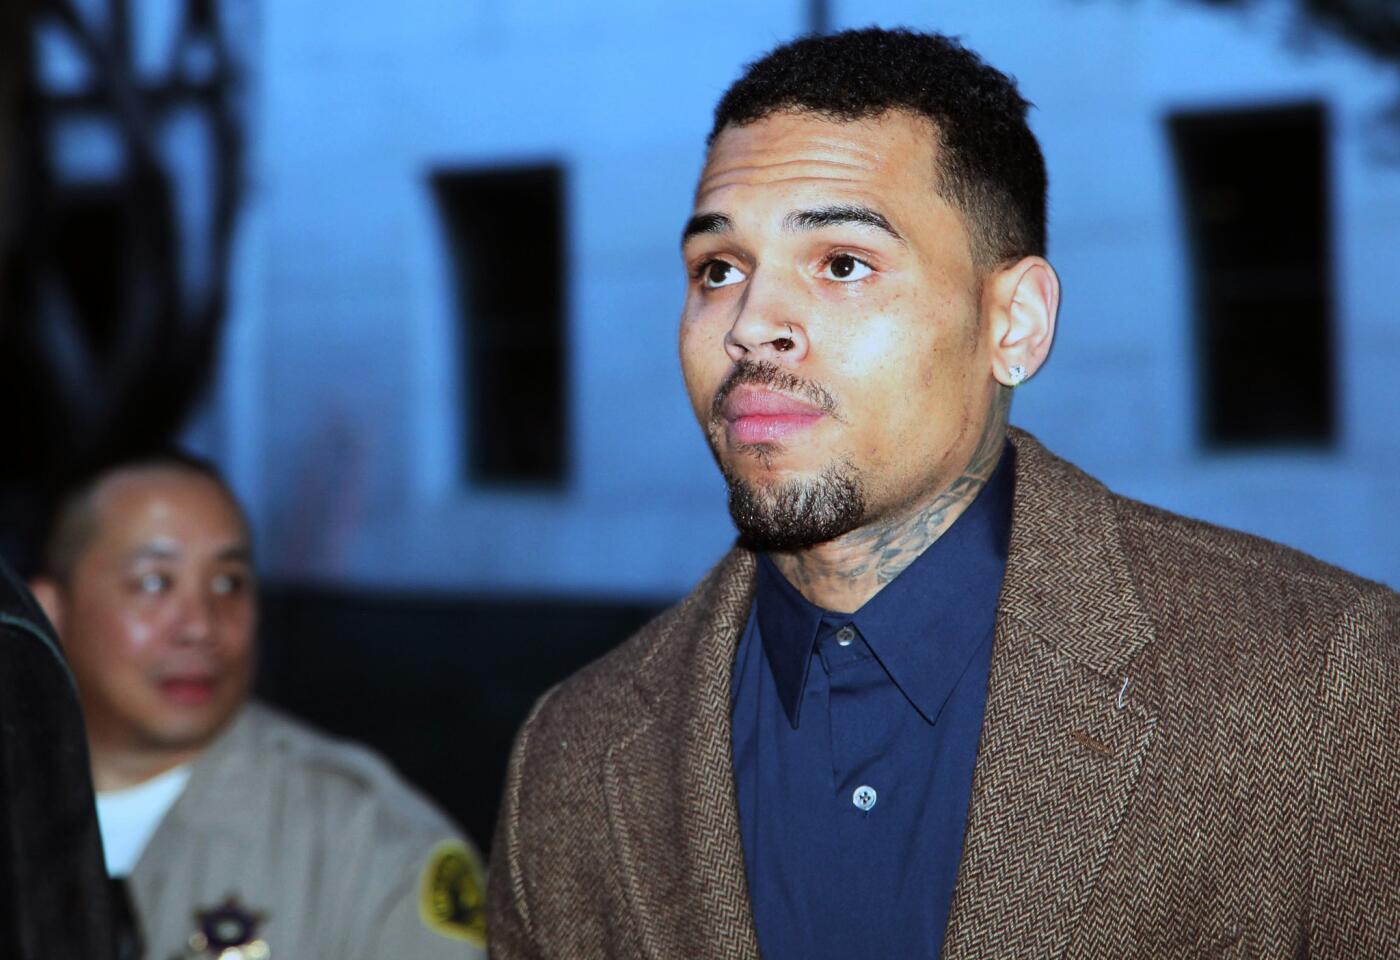 Chris Brown gets arrested again